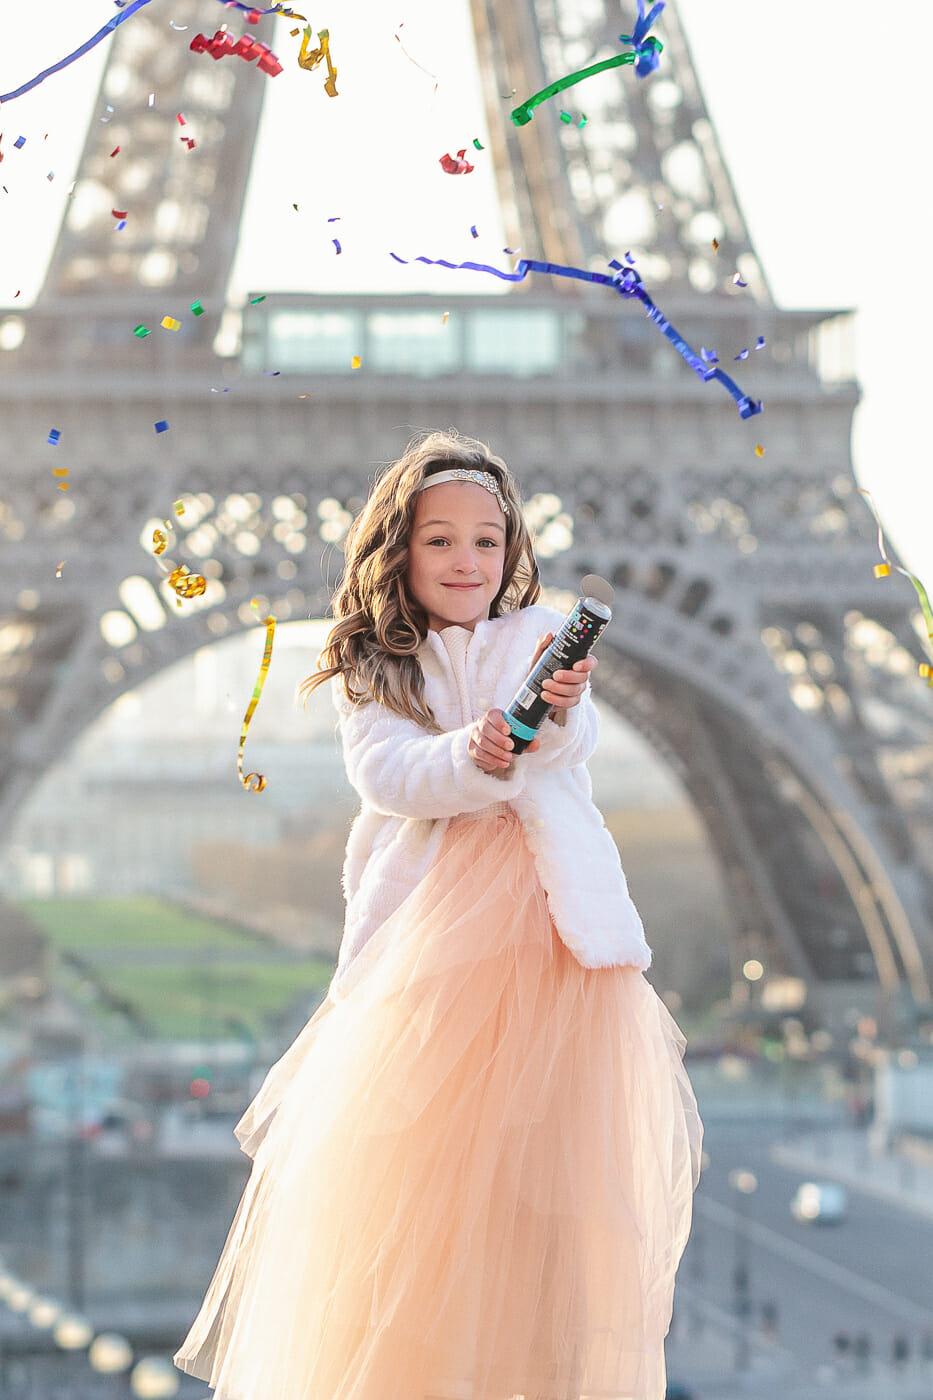 Amazing solo portrait of girl popping confetti in front of the Eiffel Tower